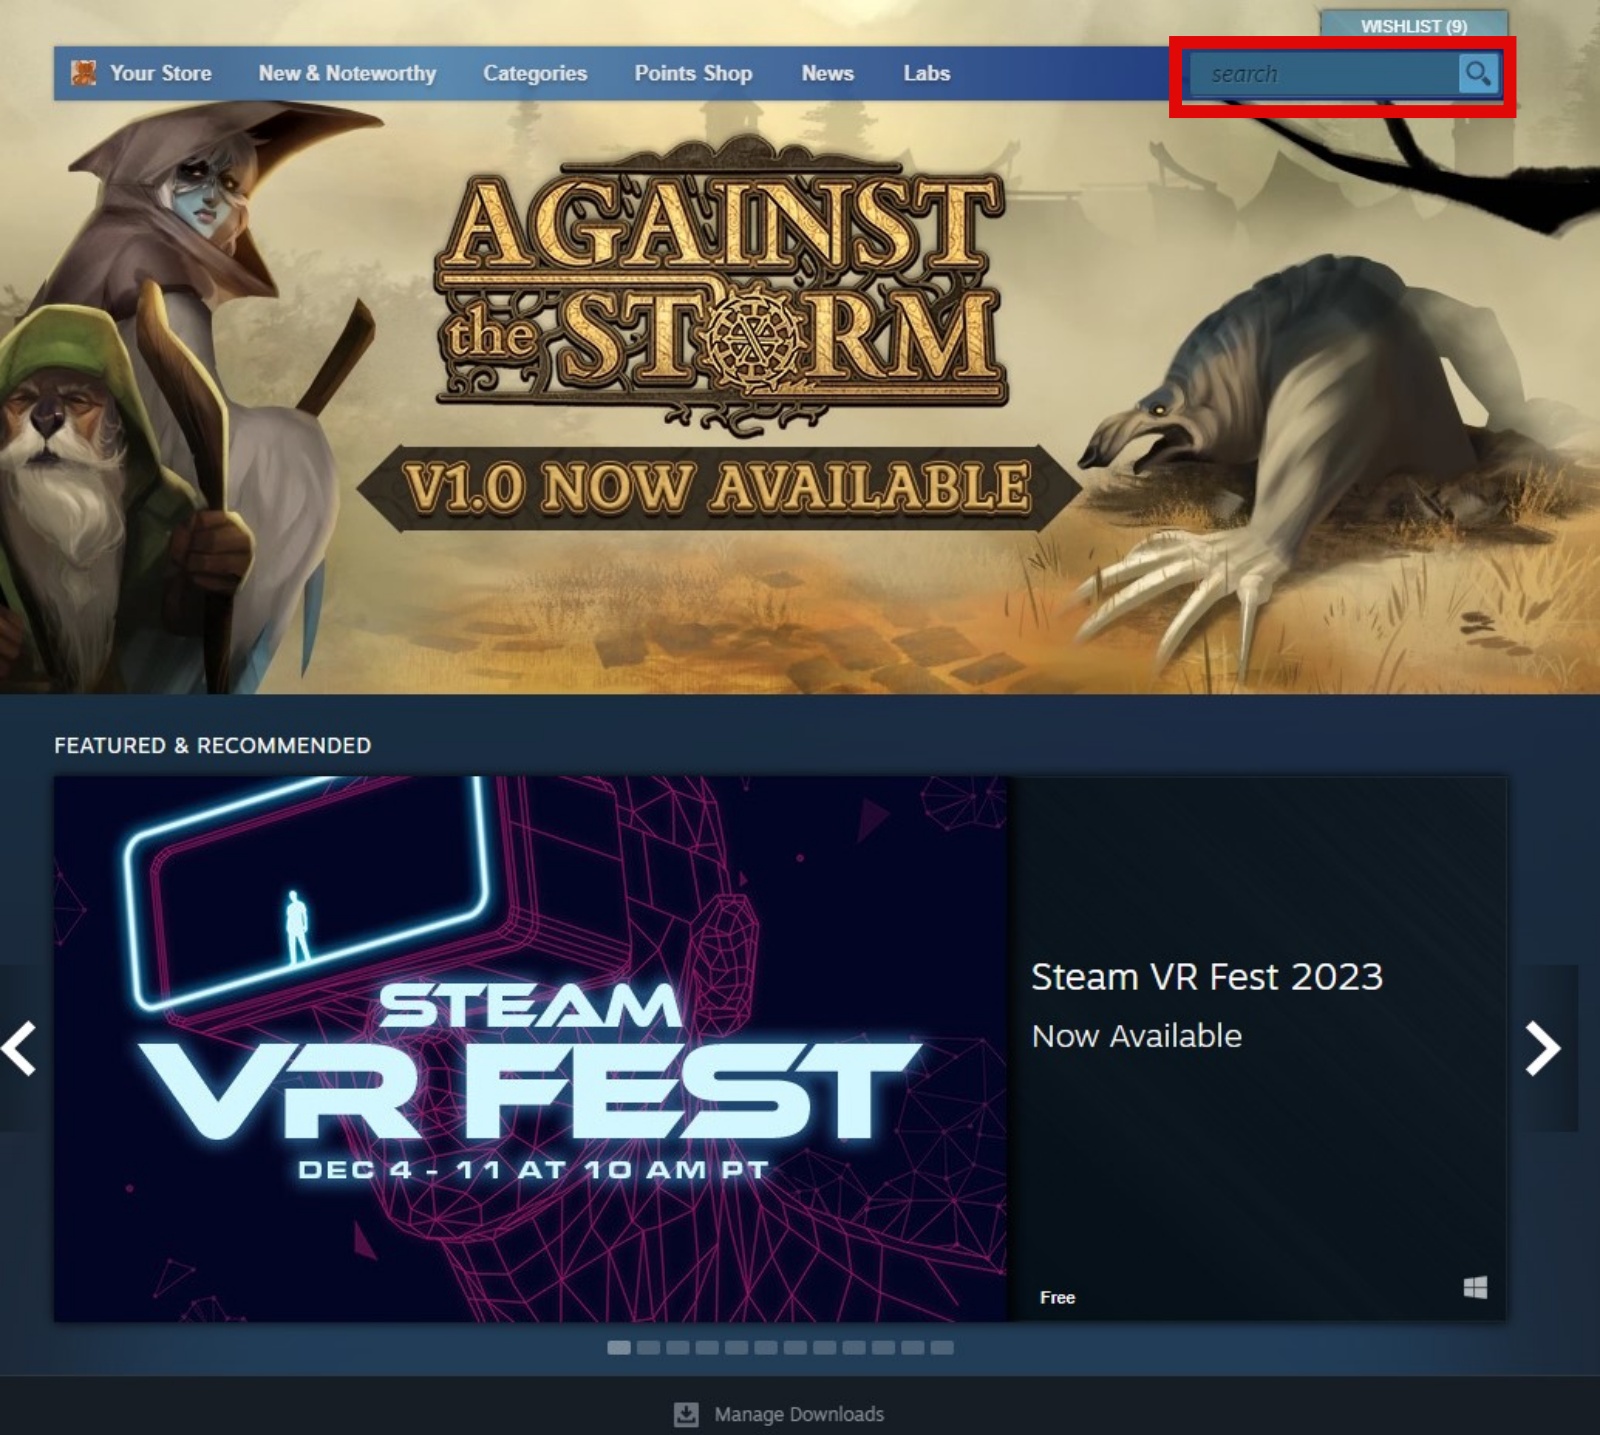 How to search games on Steam